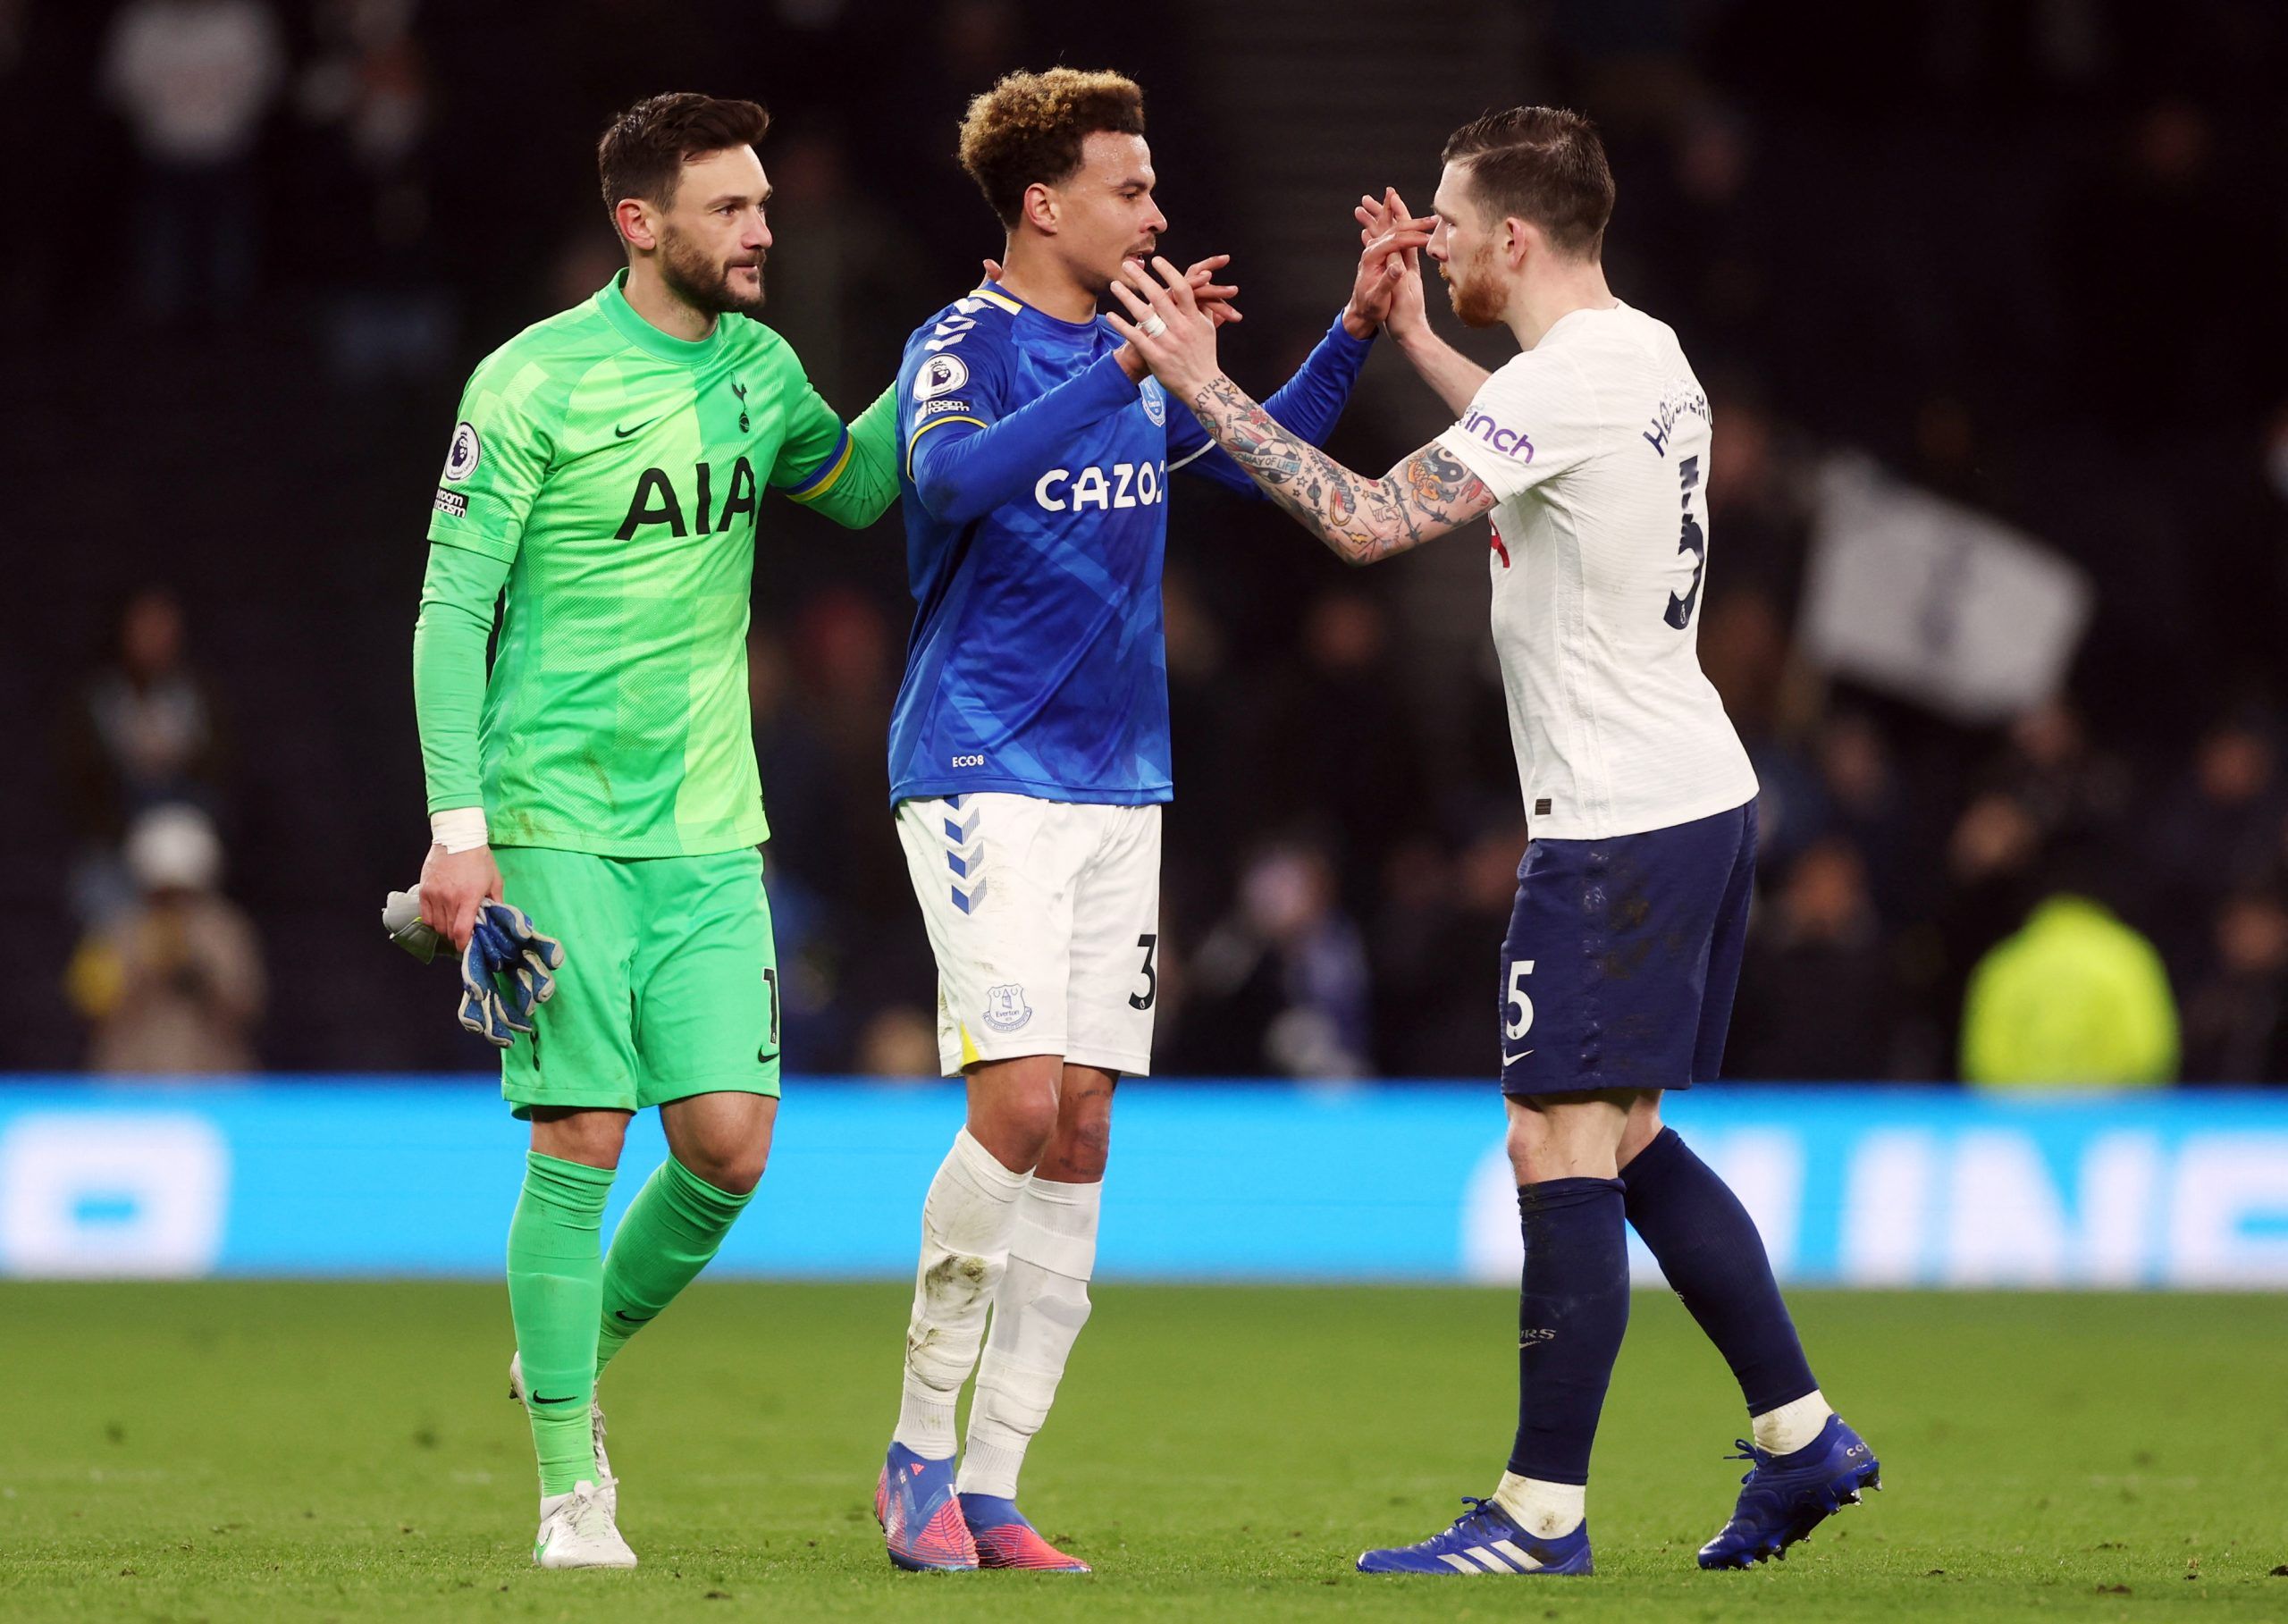 Soccer Football - Premier League - Tottenham Hotspur v Everton - Tottenham Hotspur Stadium, London, Britain - March 7, 2022 Everton's Dele Alli with Tottenham Hotspur's Hugo Lloris and Pierre-Emile Hojbjerg after the match Action Images via Reuters/Matthew Childs EDITORIAL USE ONLY. No use with unauthorized audio, video, data, fixture lists, club/league logos or 'live' services. Online in-match use limited to 75 images, no video emulation. No use in betting, games or single club /league/player p